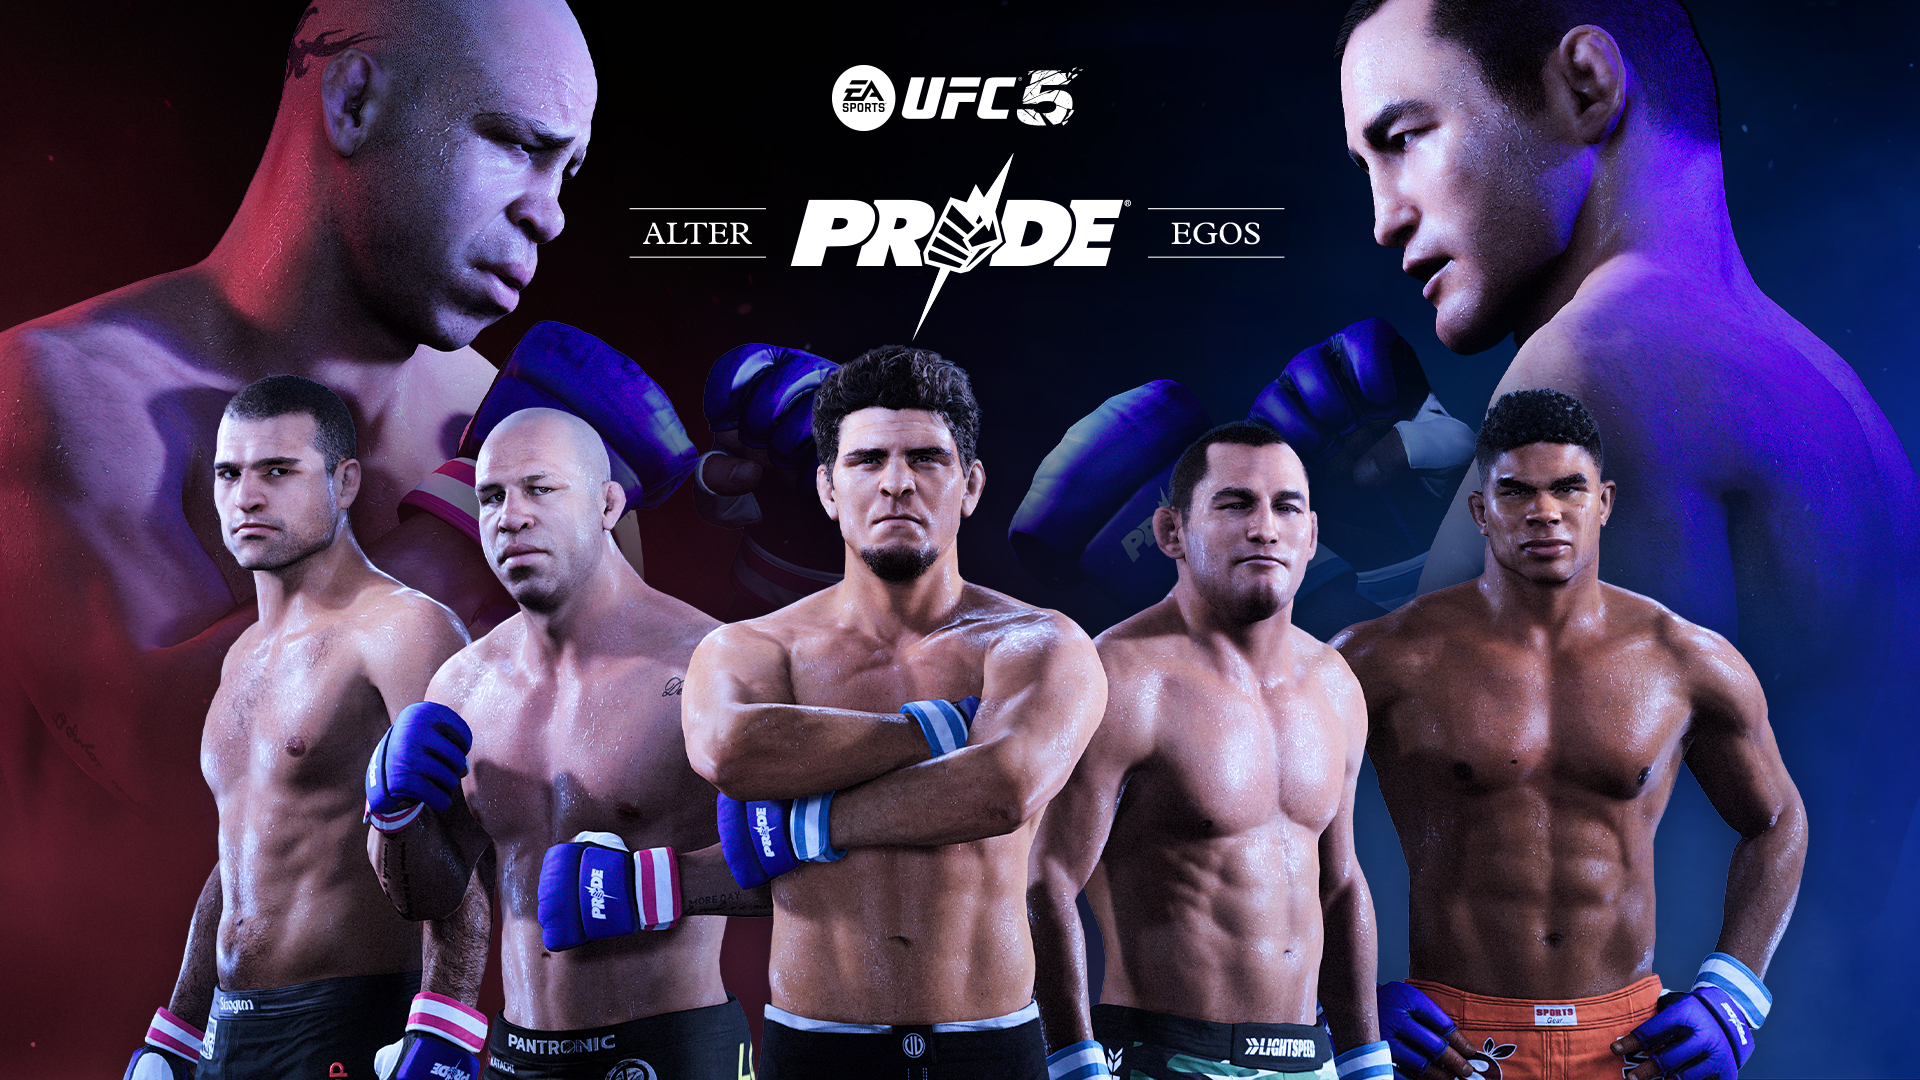 EA Sports UFC 5 PRIDE Alter Egos Available - How to Unlock